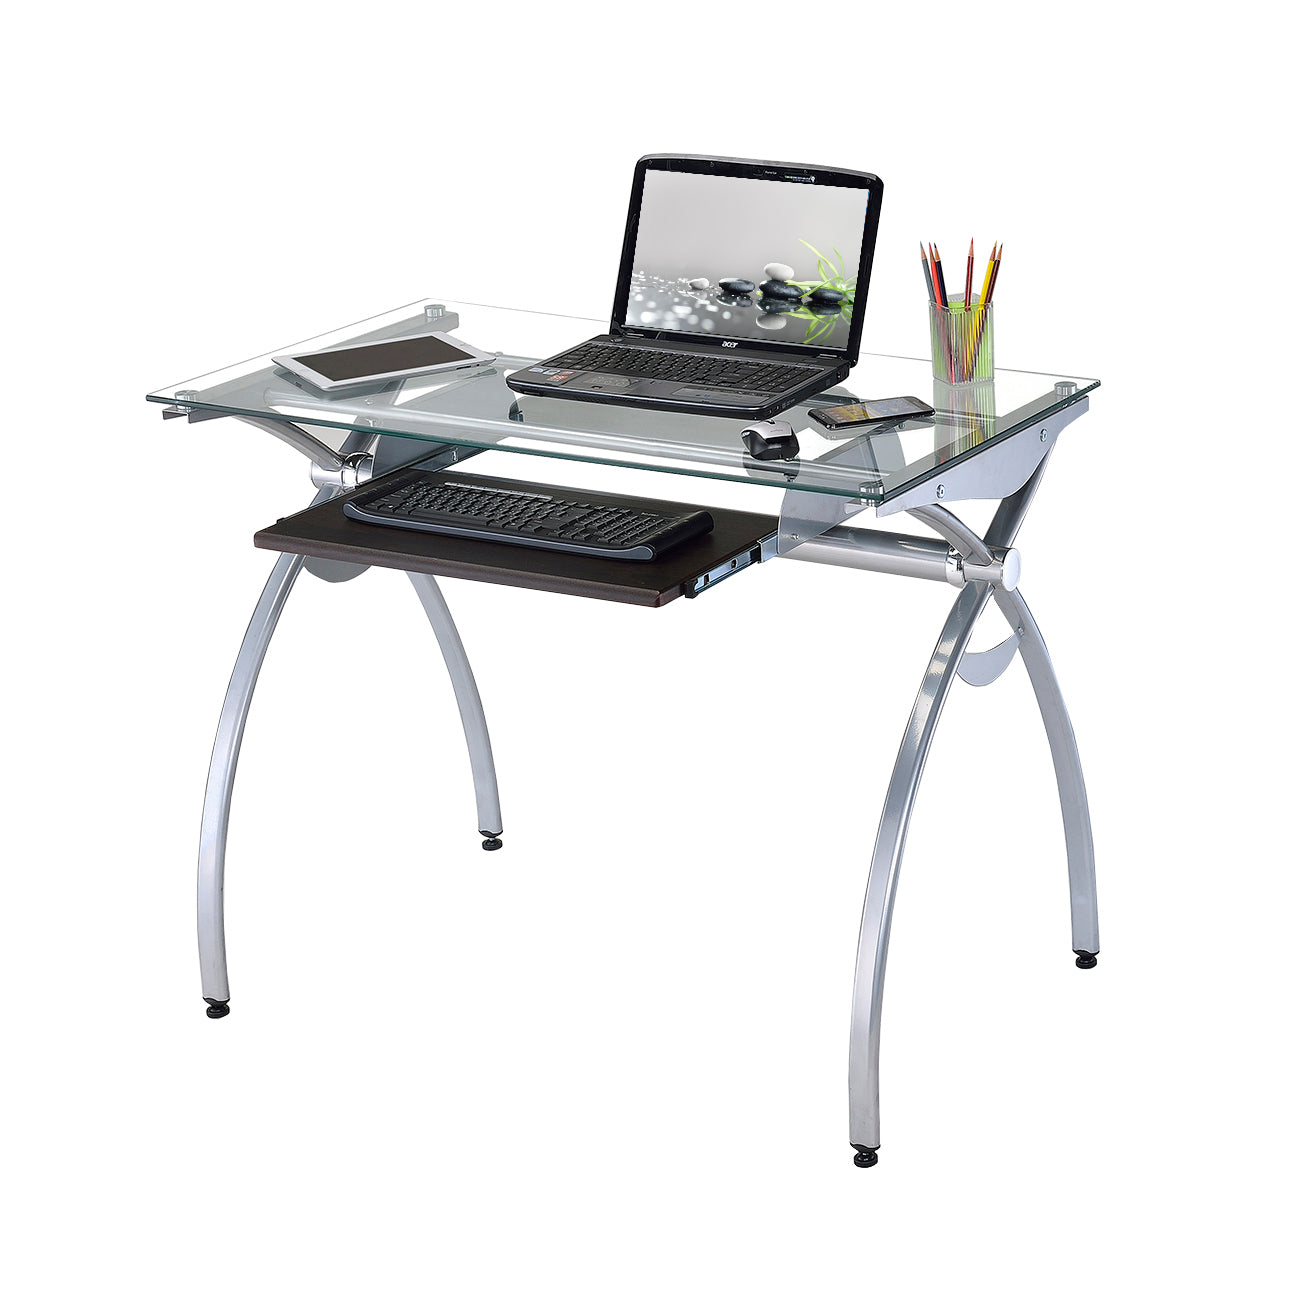 Techni Mobili Contempo Clear Glass Top Computer Desk with Pull Out Keyboard PanelClear (White)